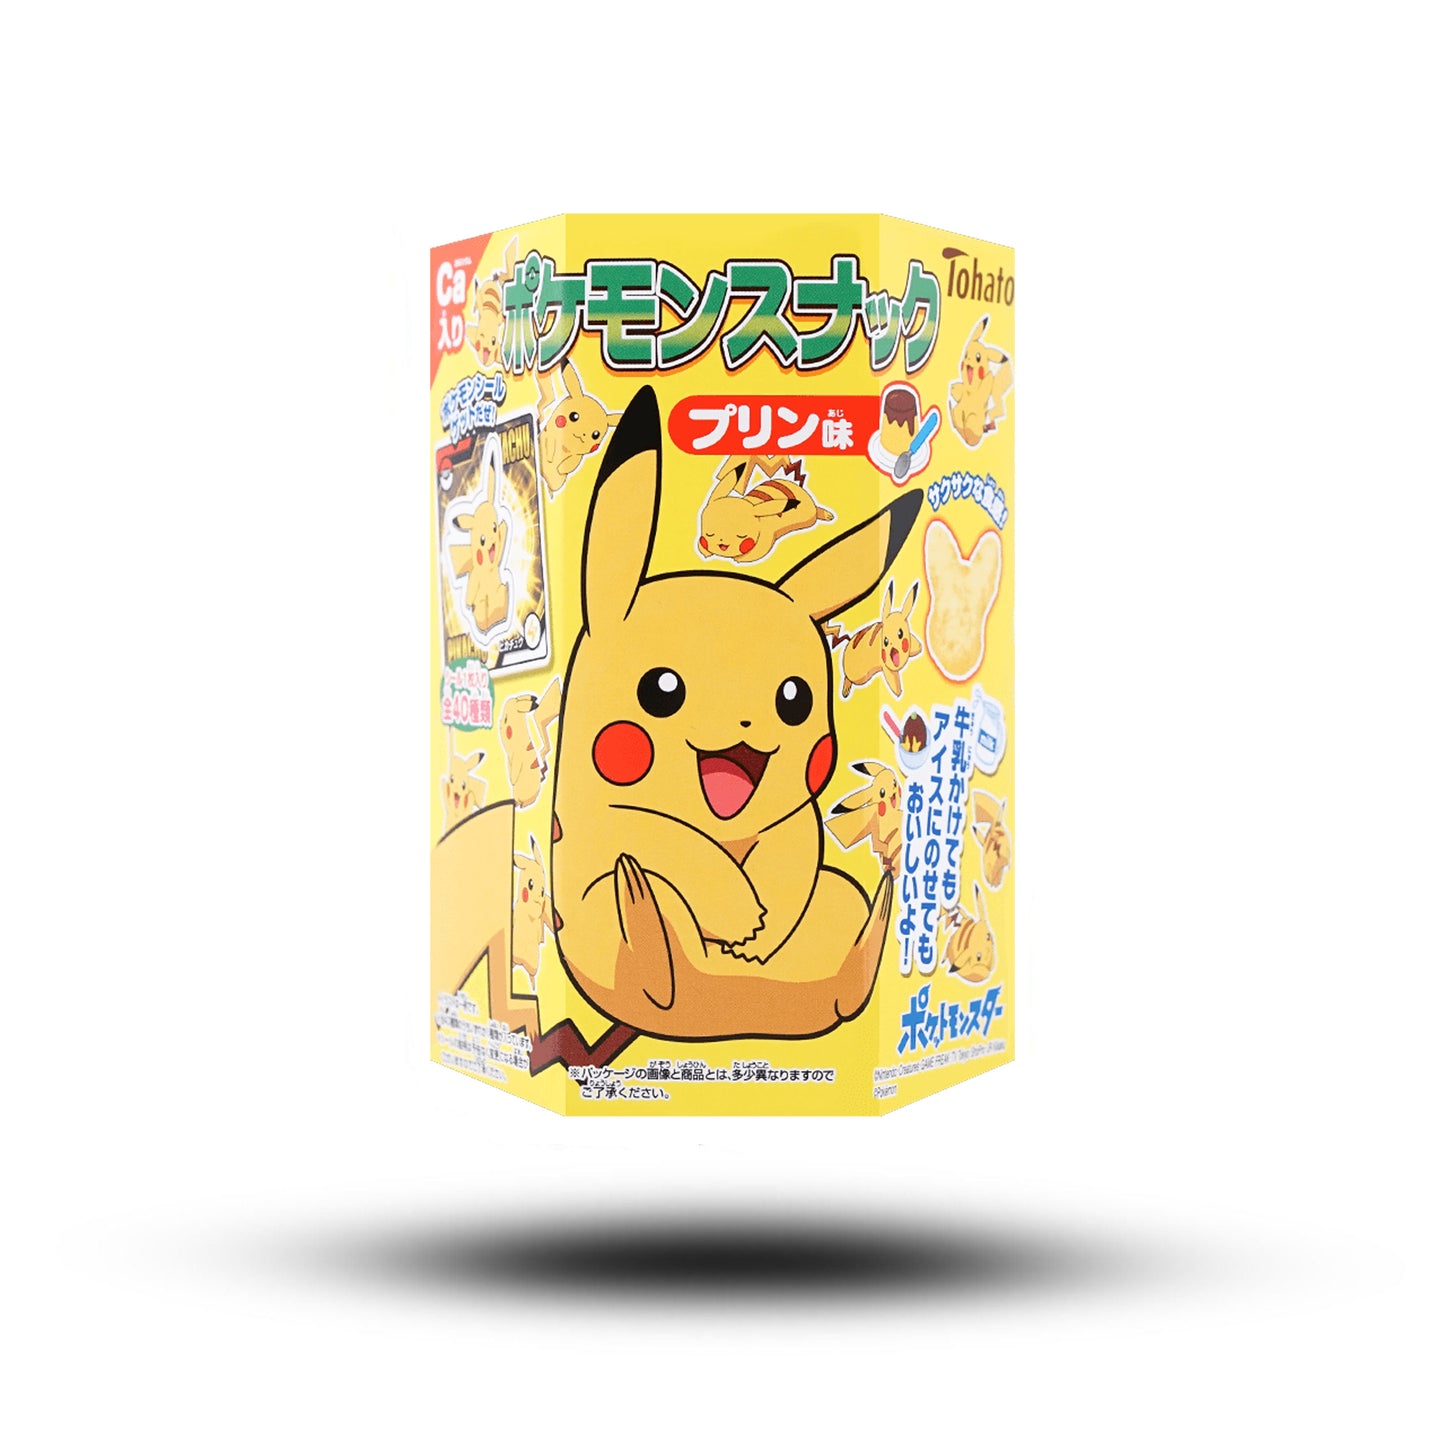 Tohato Anime Pudding Flavour 23g